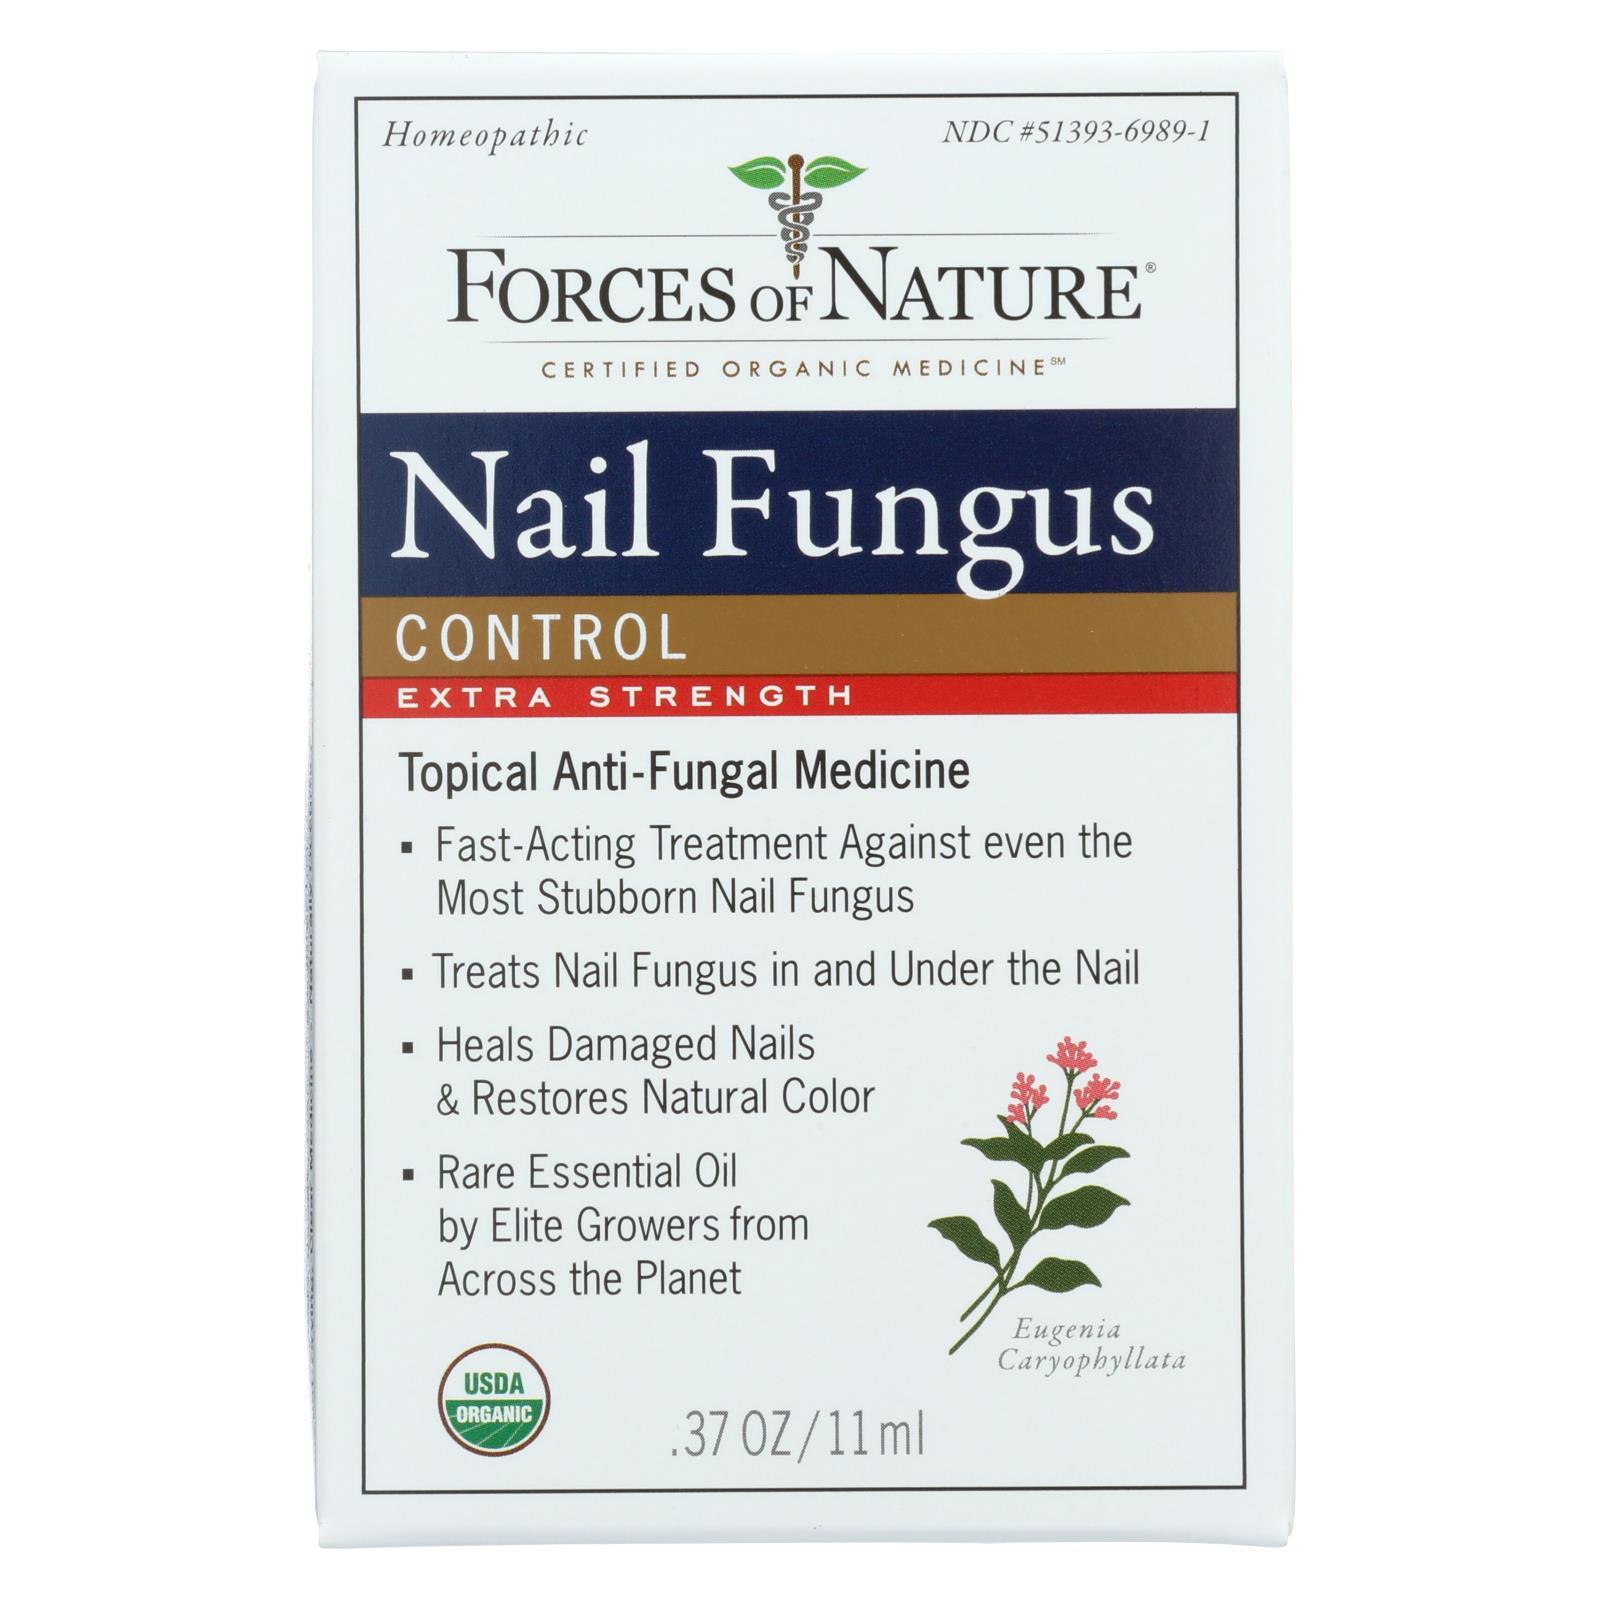 Image showing the Forces Of Nature - Organic Nail Fungus Control product